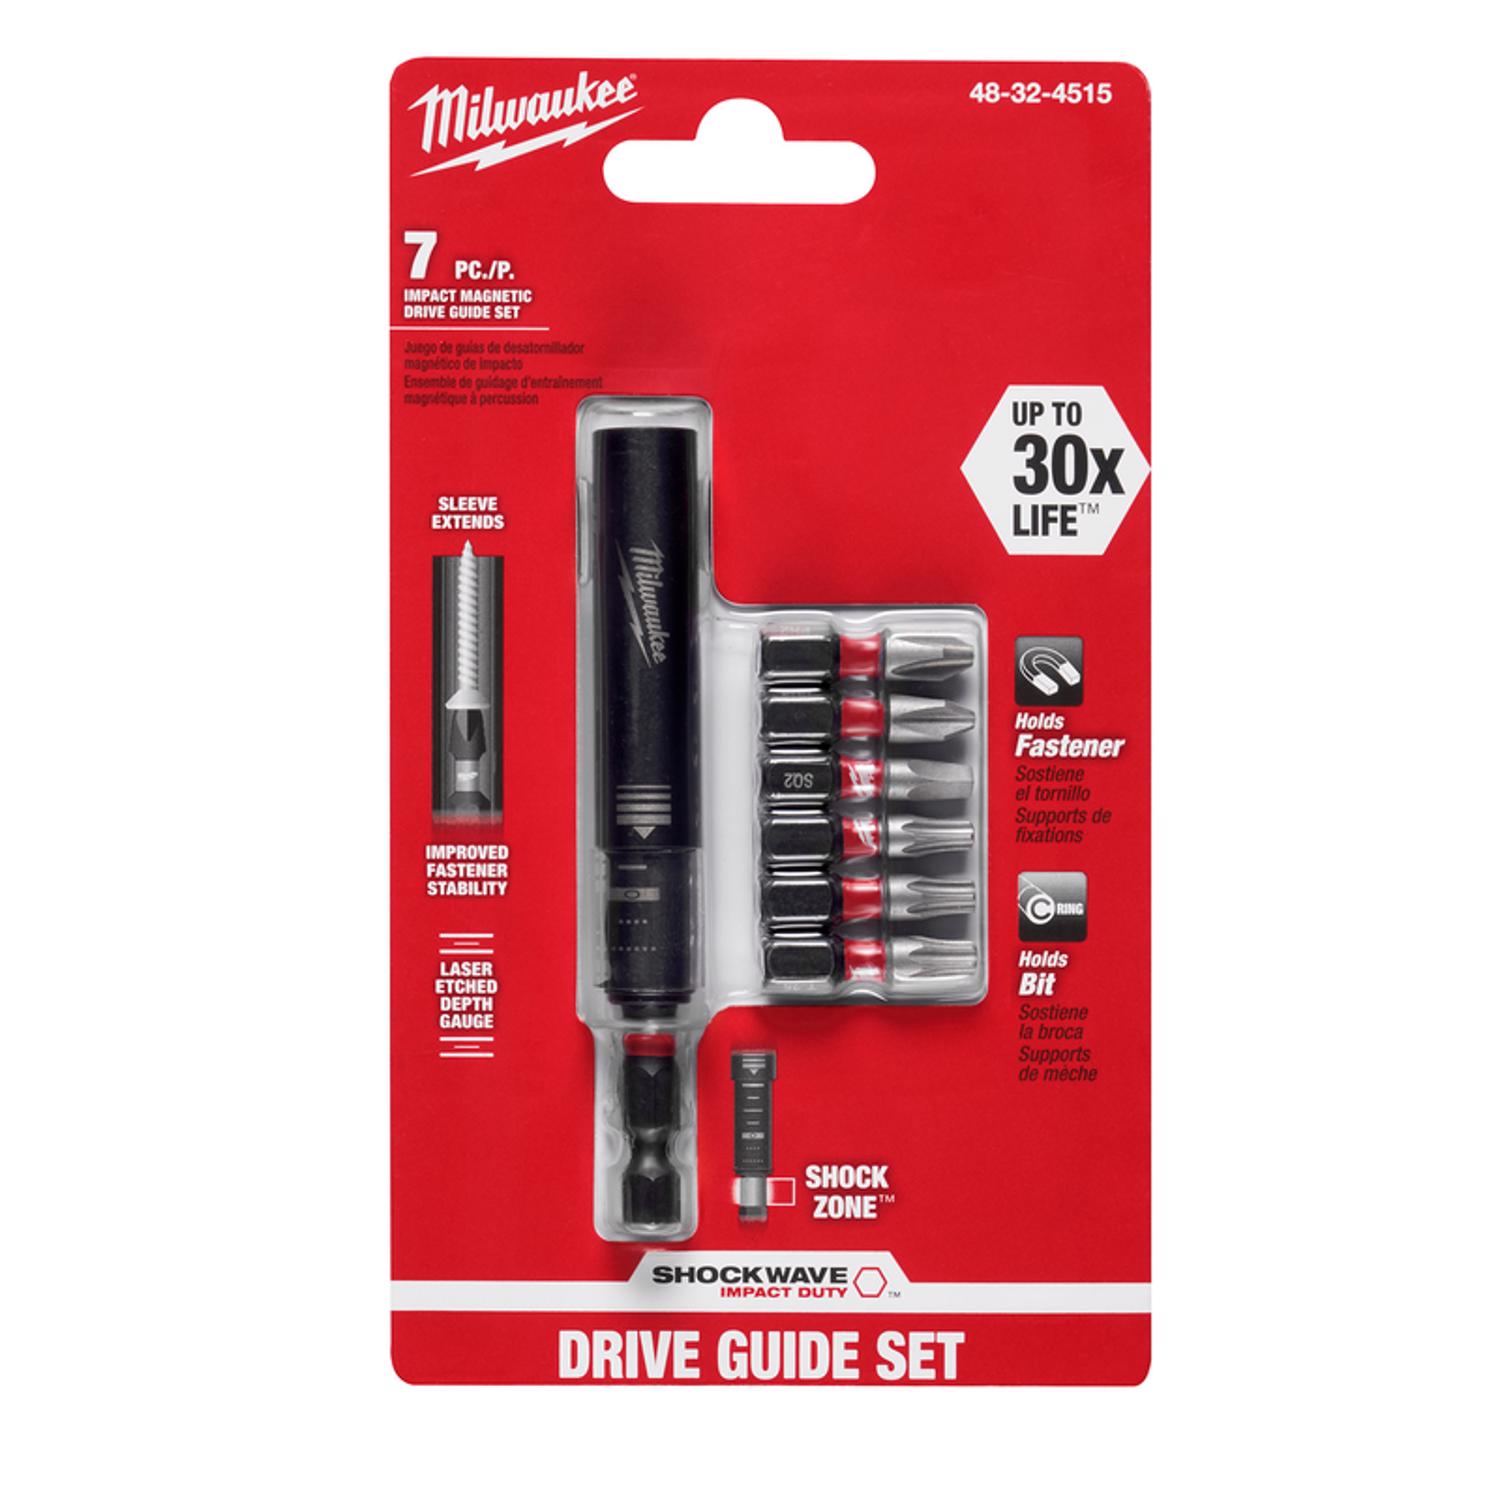 Photos - Drill Bit Milwaukee Shockwave Assorted 3 in. L Magnetic Drive Guide and Bit Set Allo 